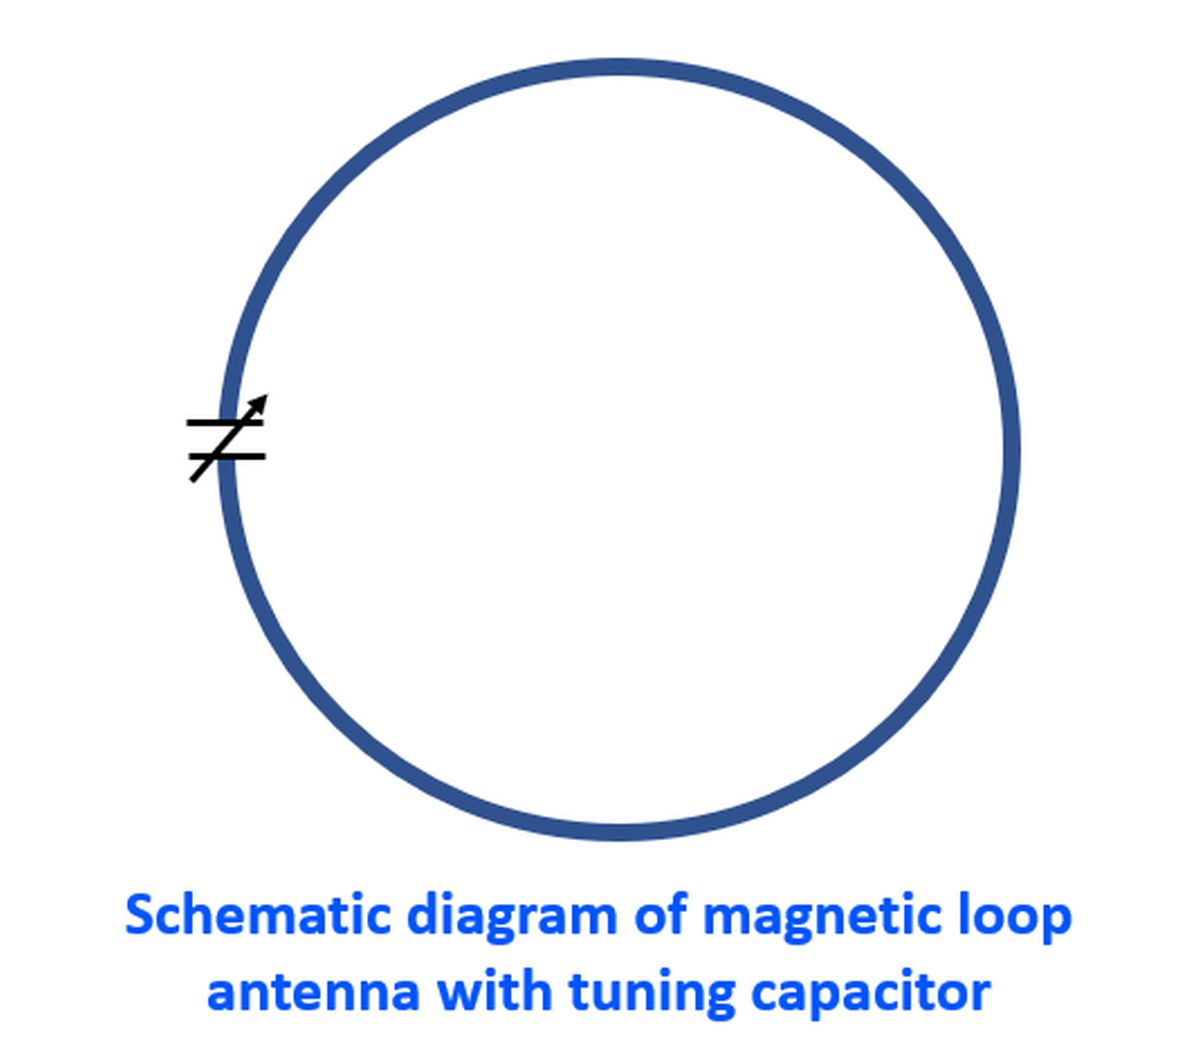 Schematic diagram of magnetic loop antenna with tuning capacitor